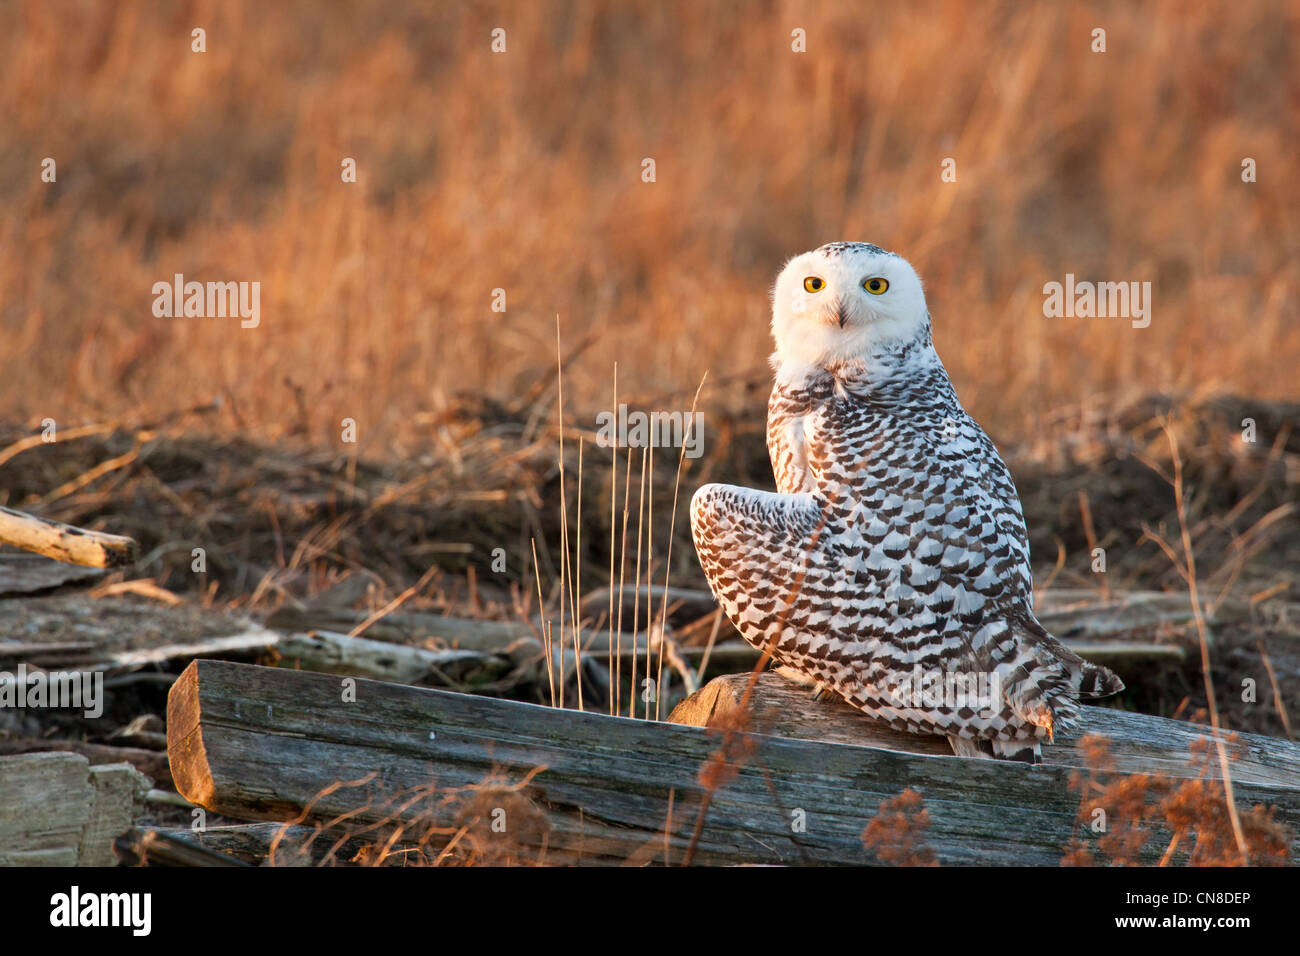 Juvenile Snowy owl perched on log in marsh at sunrise-Boundary Bay, British Columbia, Canada. Stock Photo